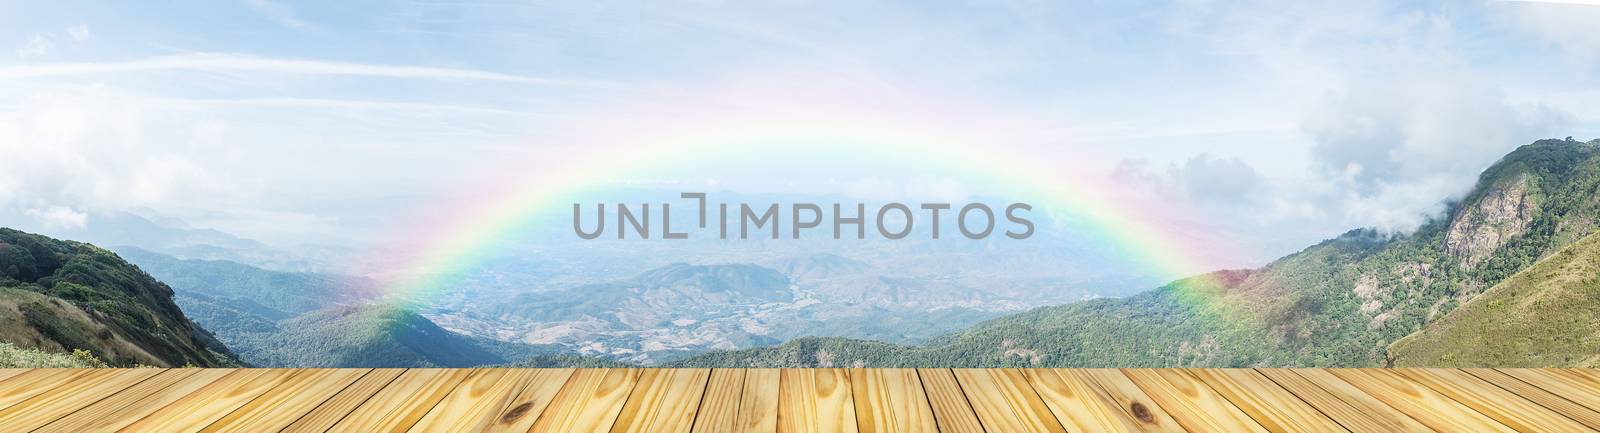 Empty wooden table top and blurred view of rainbow at lanscape mountain background, For display of your product, Raining day in nature with table top background